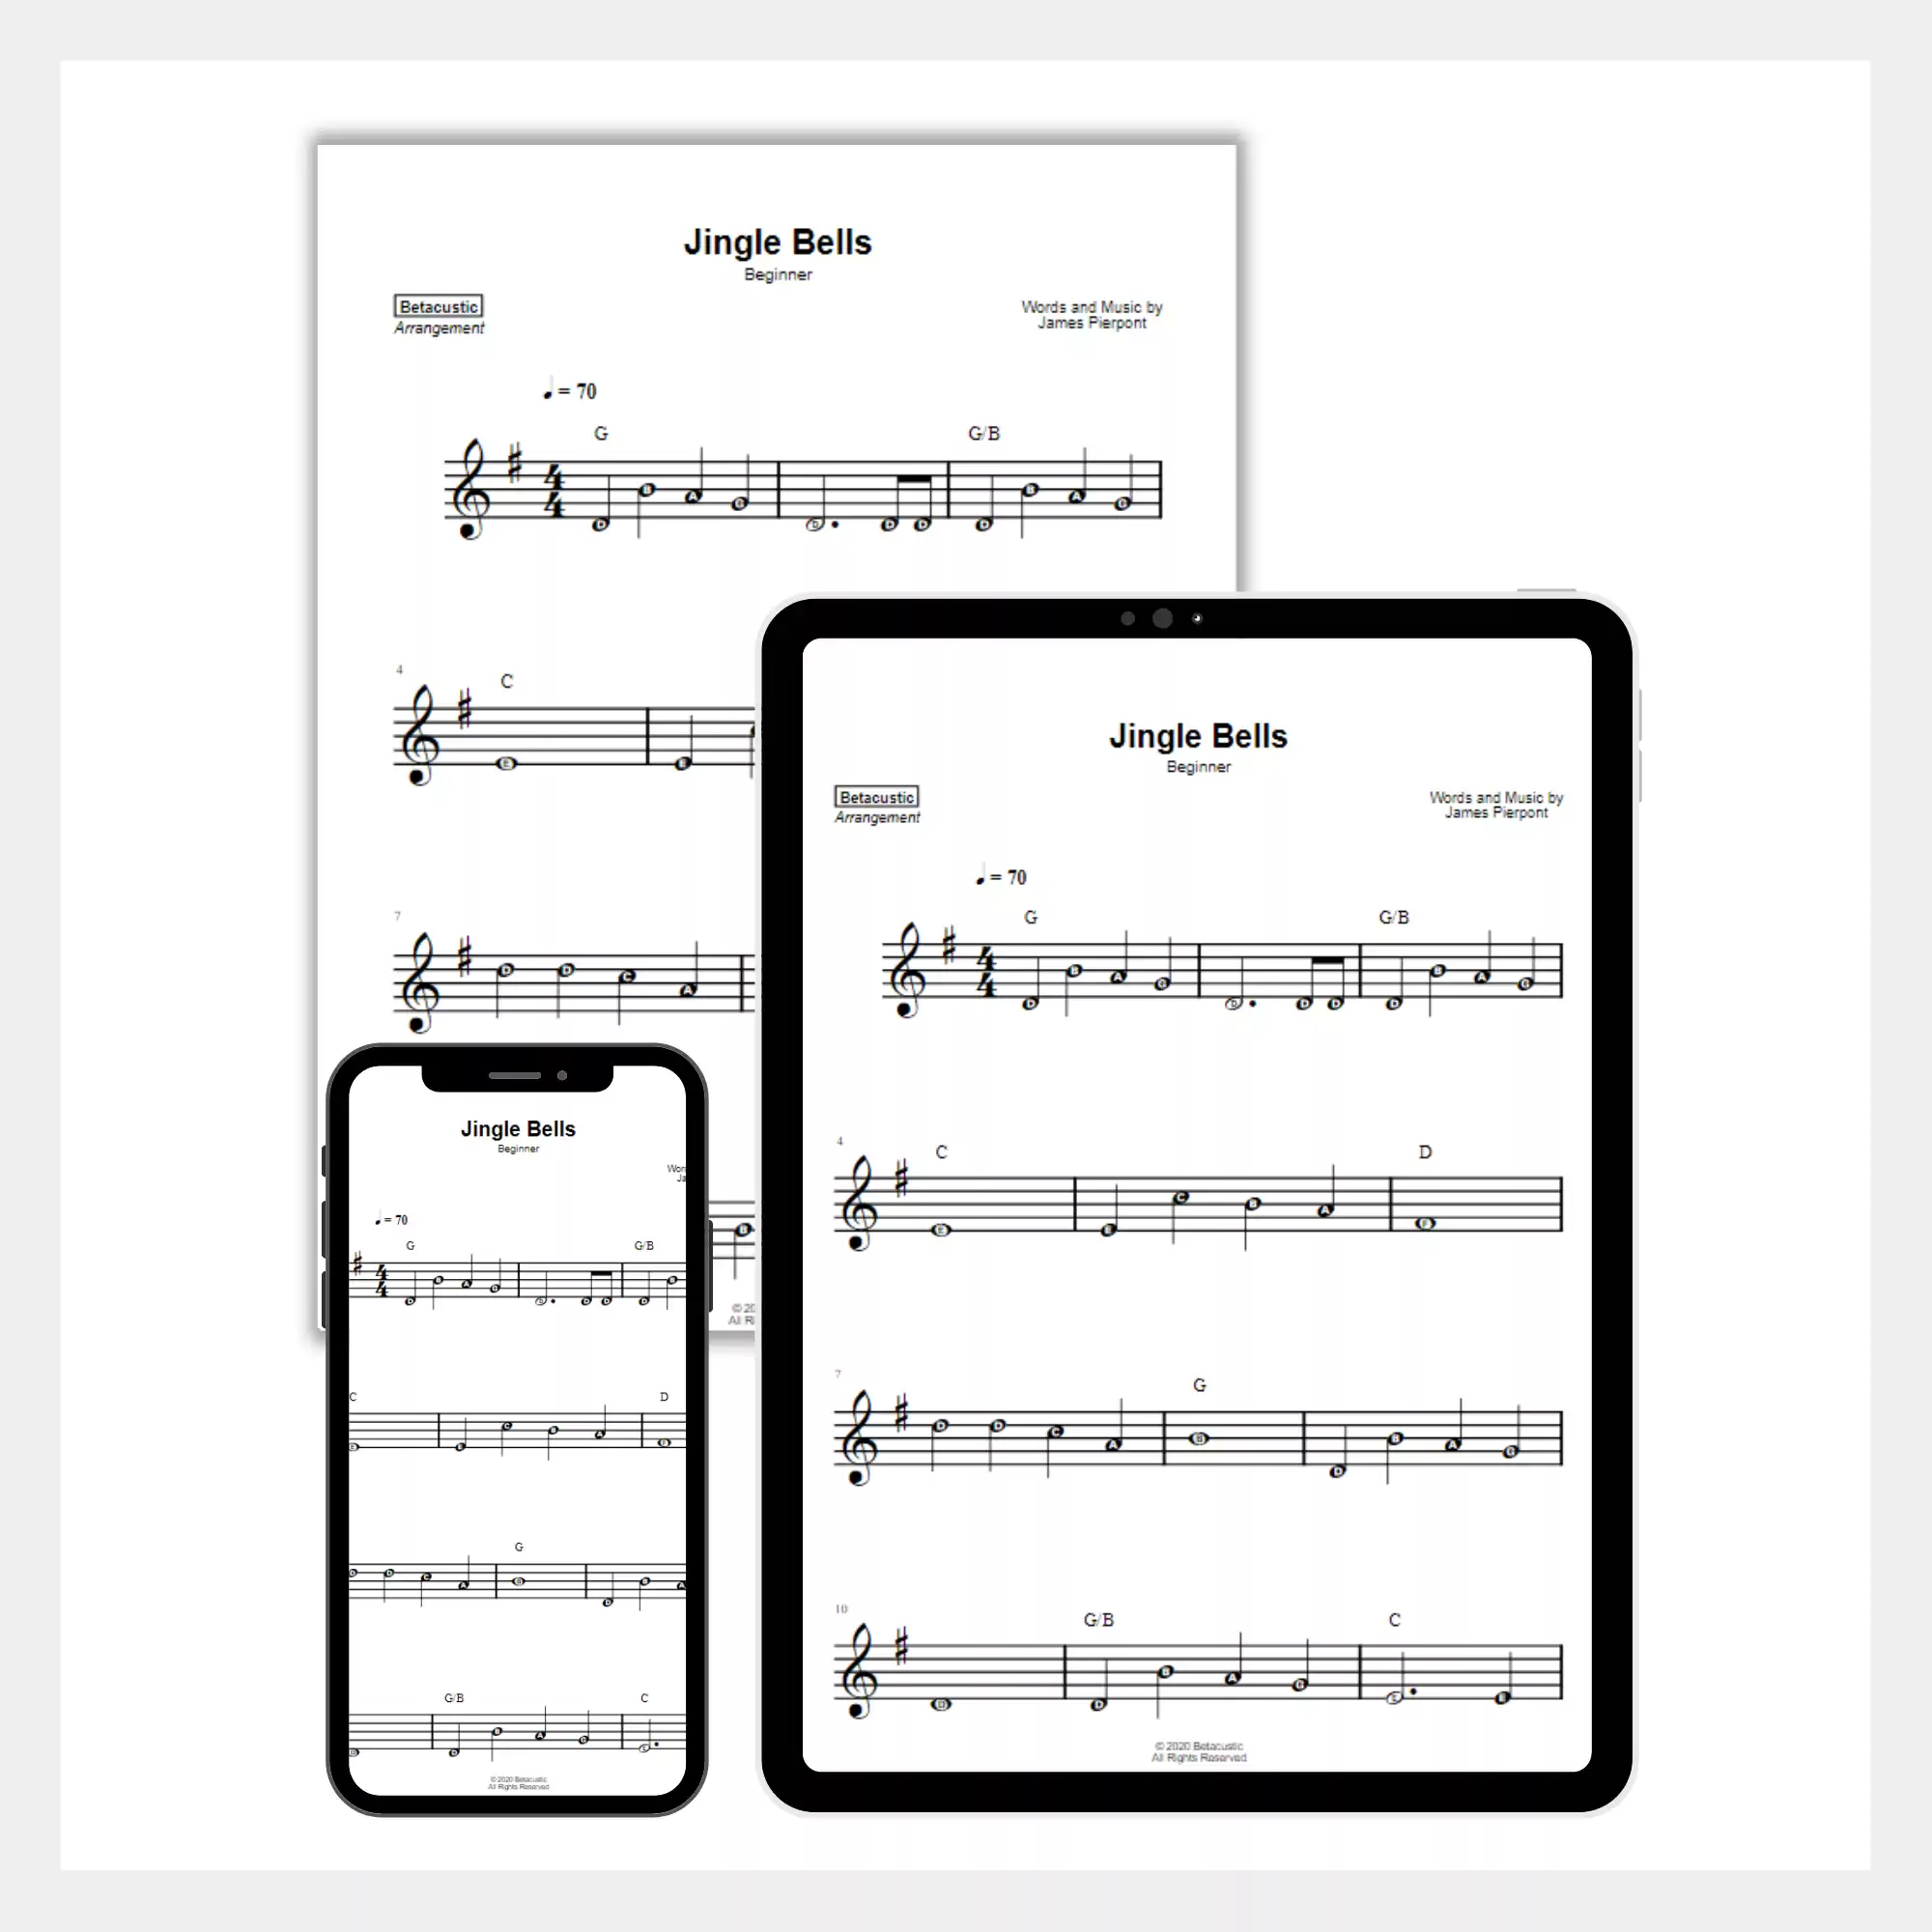 Jingle Bells Beginner Piano Sheet Music With Letters Arr. by Betacustic (Digital)